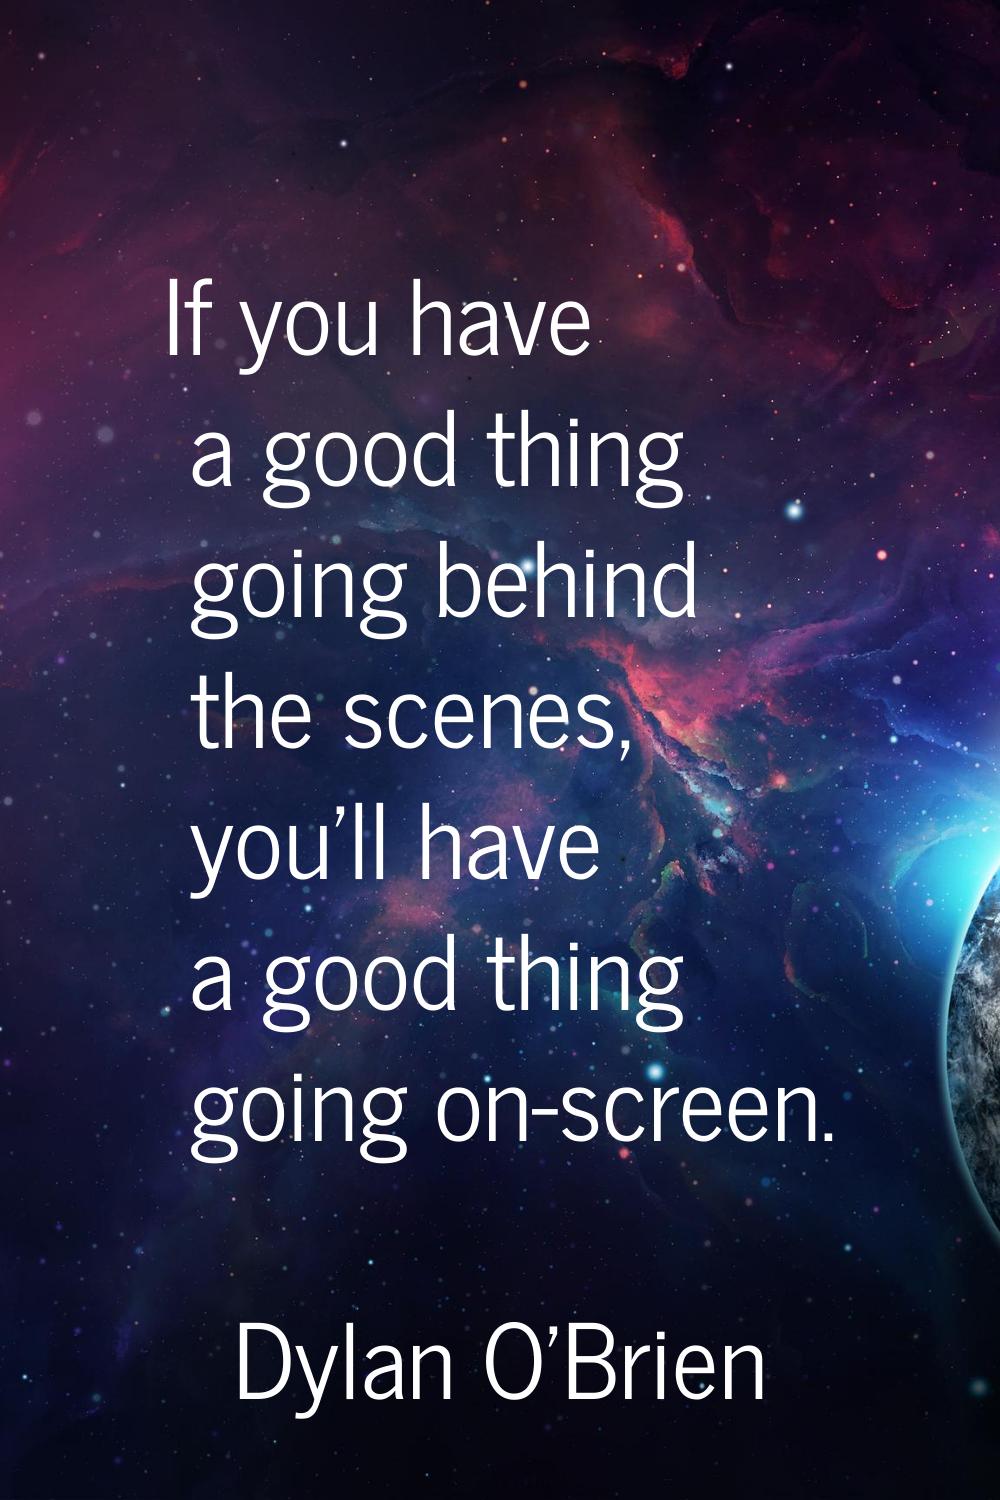 If you have a good thing going behind the scenes, you'll have a good thing going on-screen.